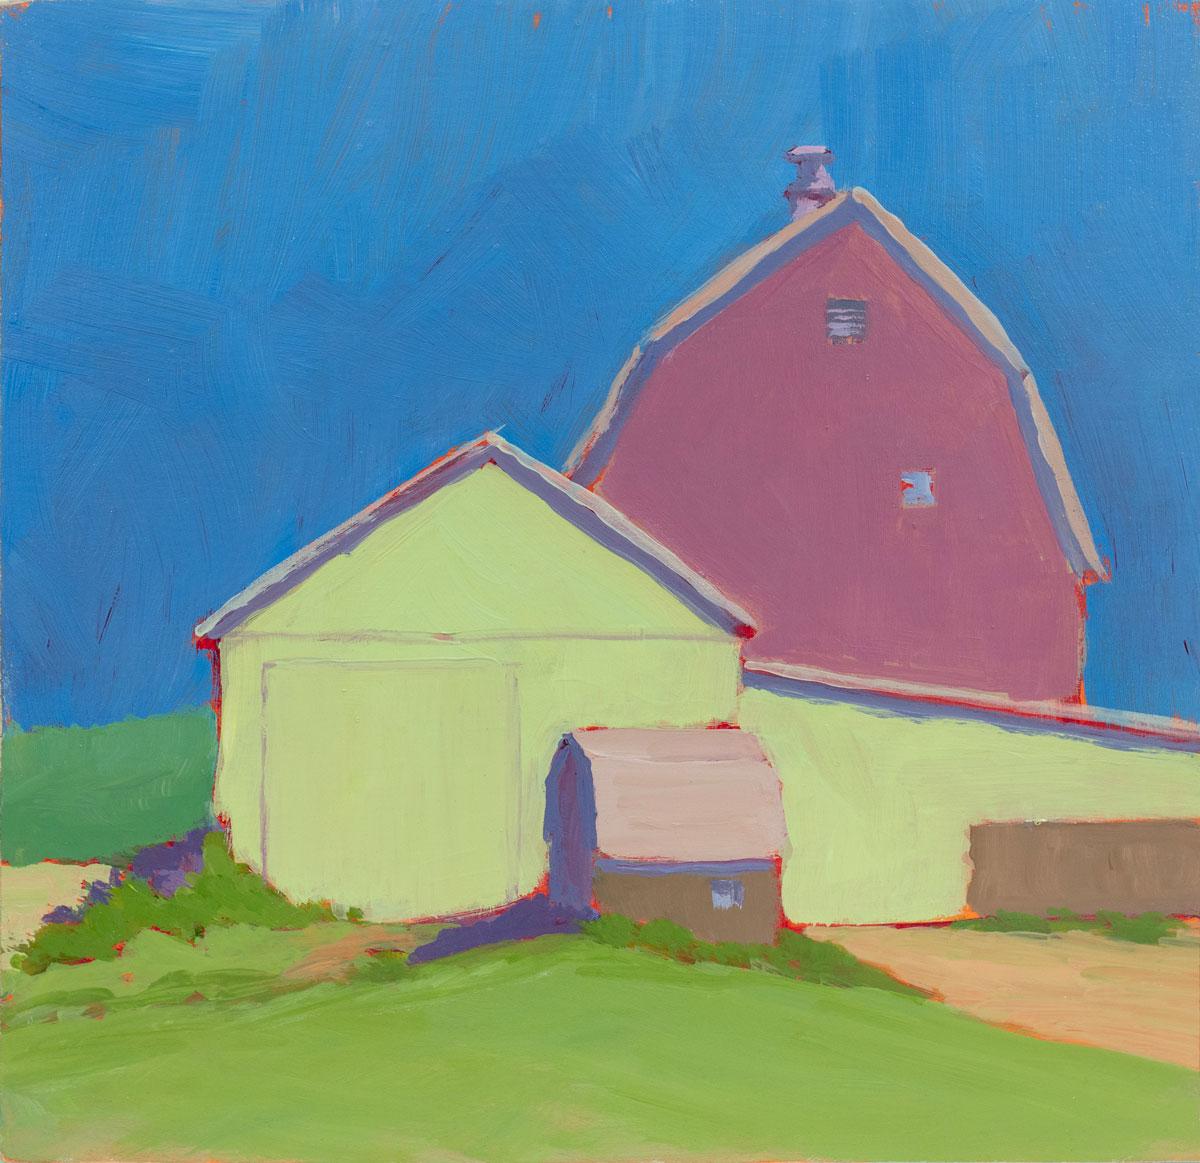 This small contemporary rural landscape painting by Carol Young features an abstracted scene of a barn with a saturated and contrasting blue, green, and red palette. The painting is broken into simplified planes of colors for a vibrant, colorful